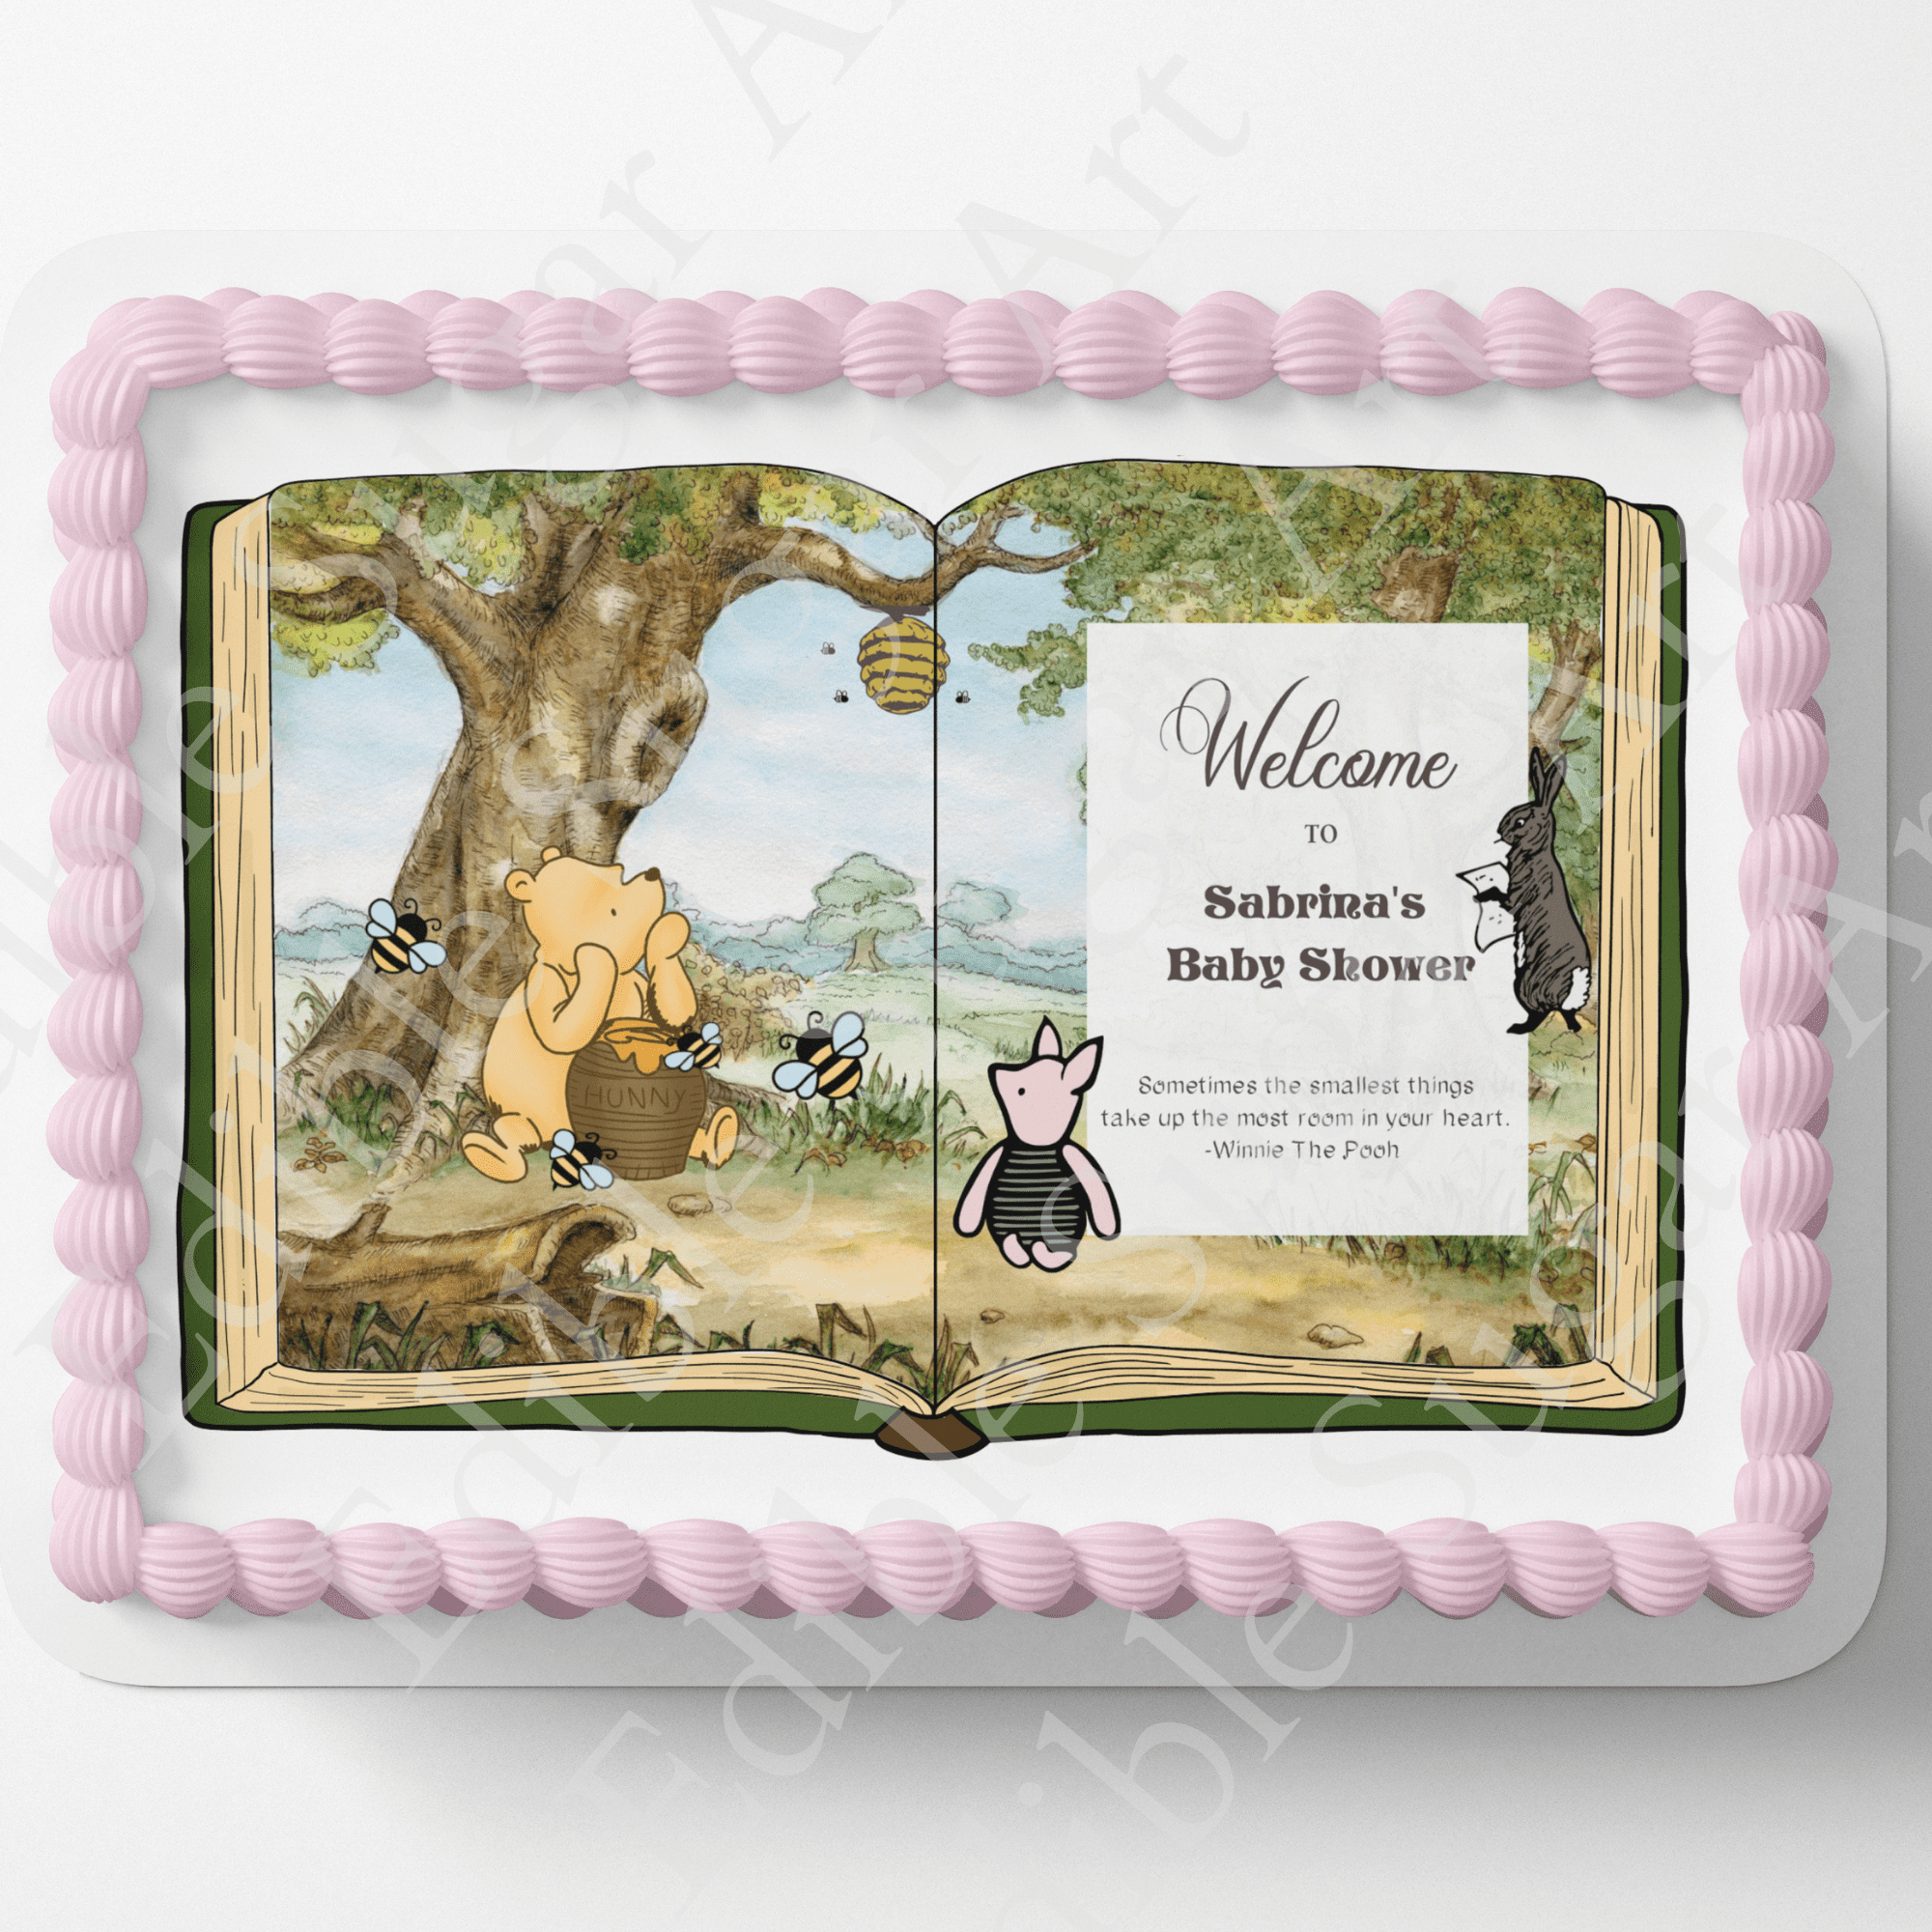 Winnie the Pooh Edible Image Photo Cake Topper Sheet Personalized Custom  Customized Birthday Party Baby Shower - 1/4 Sheet - 78158